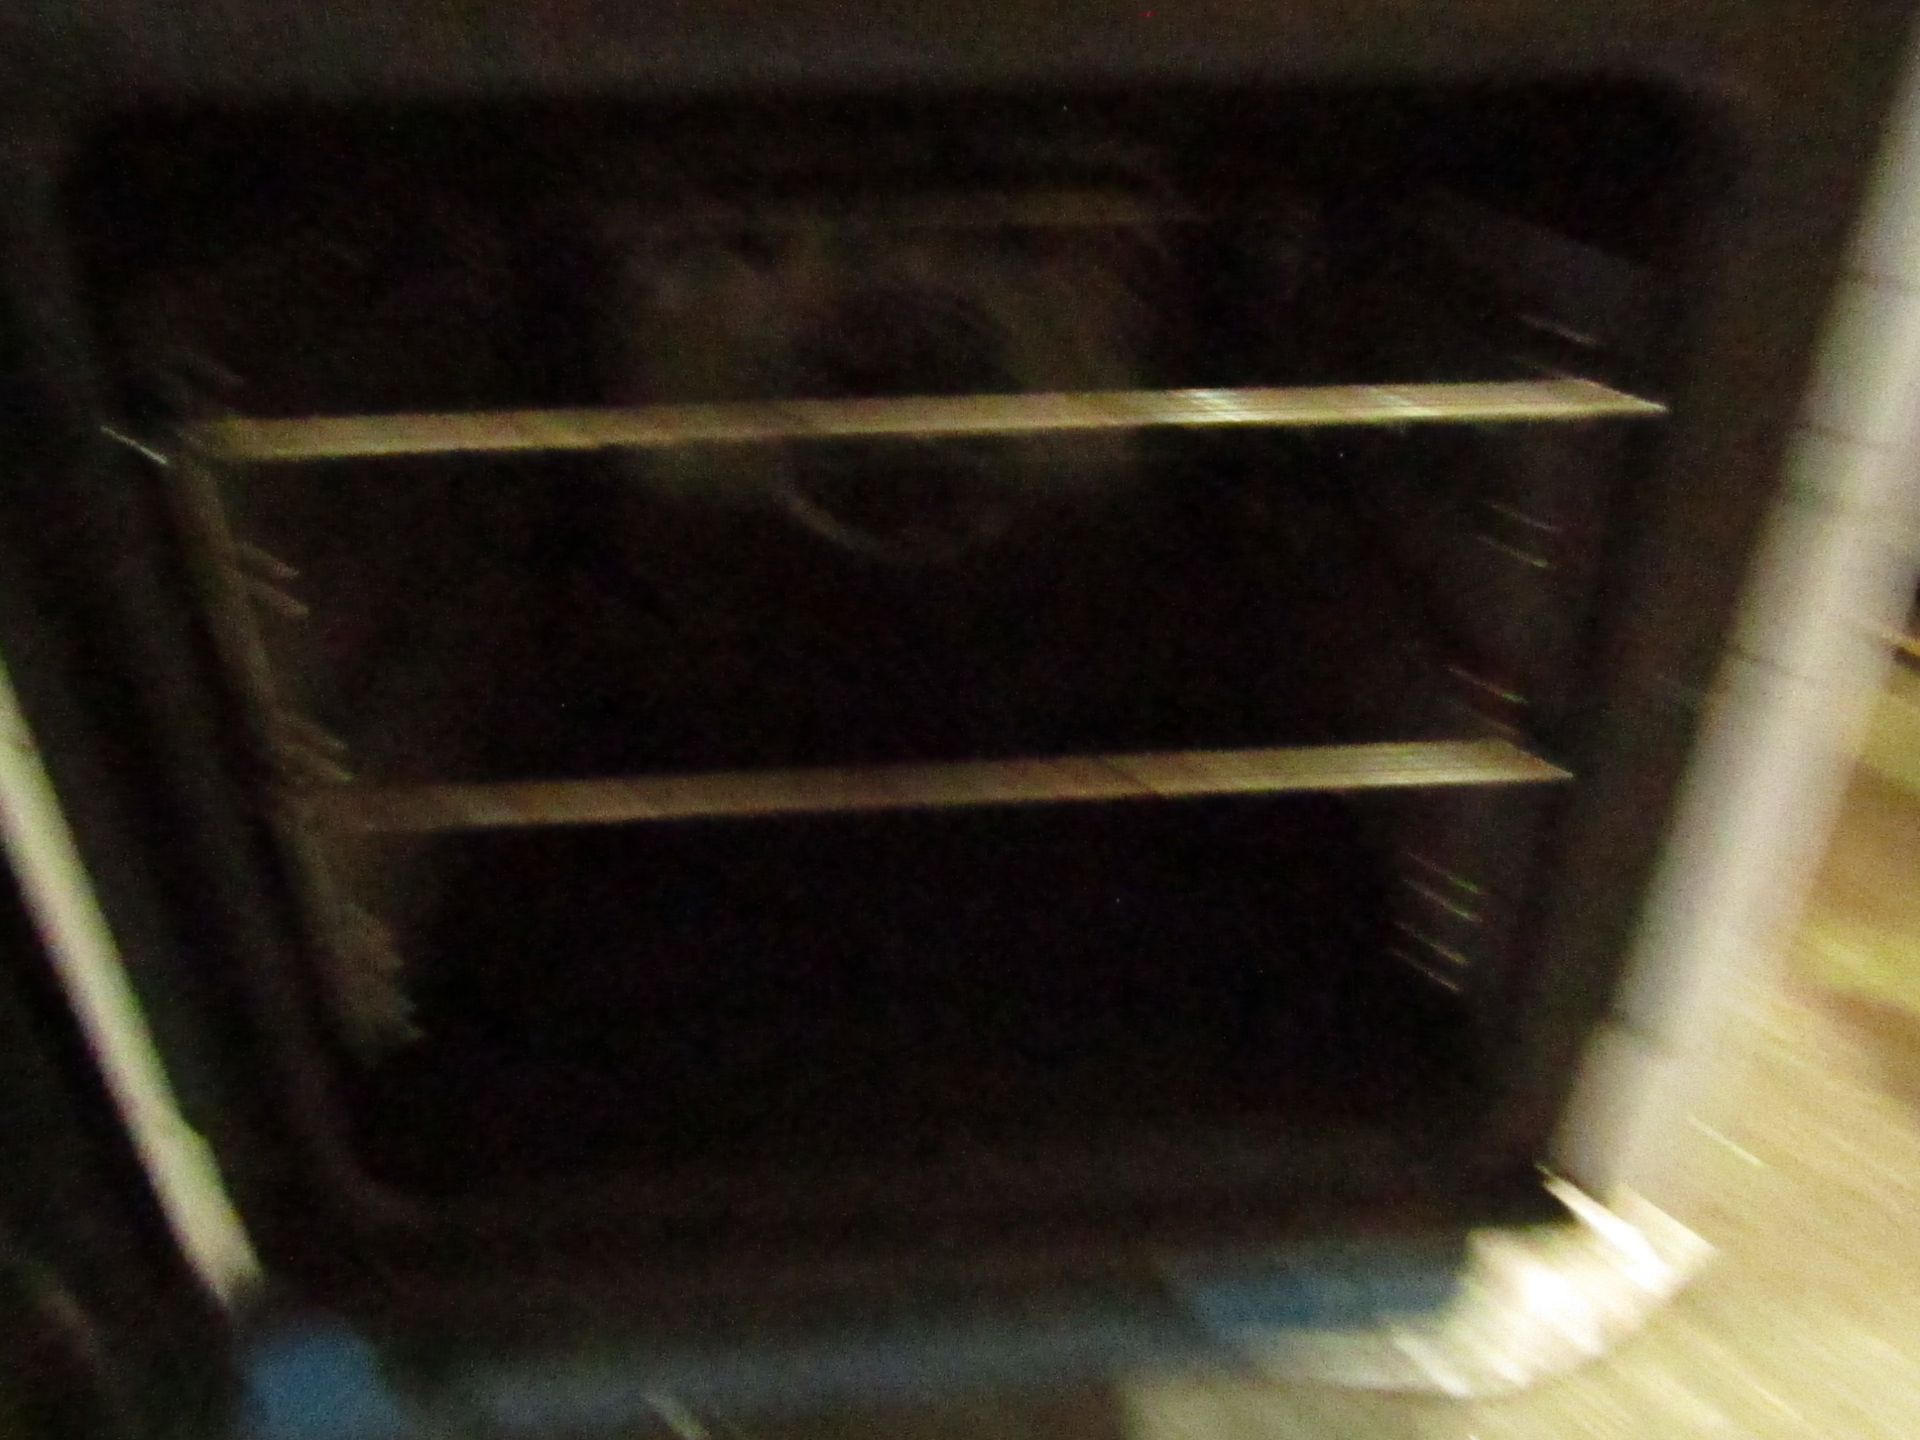 Hisense Double oven with ceramic hob, This item looks to be in good condition and appears ready - Image 4 of 4